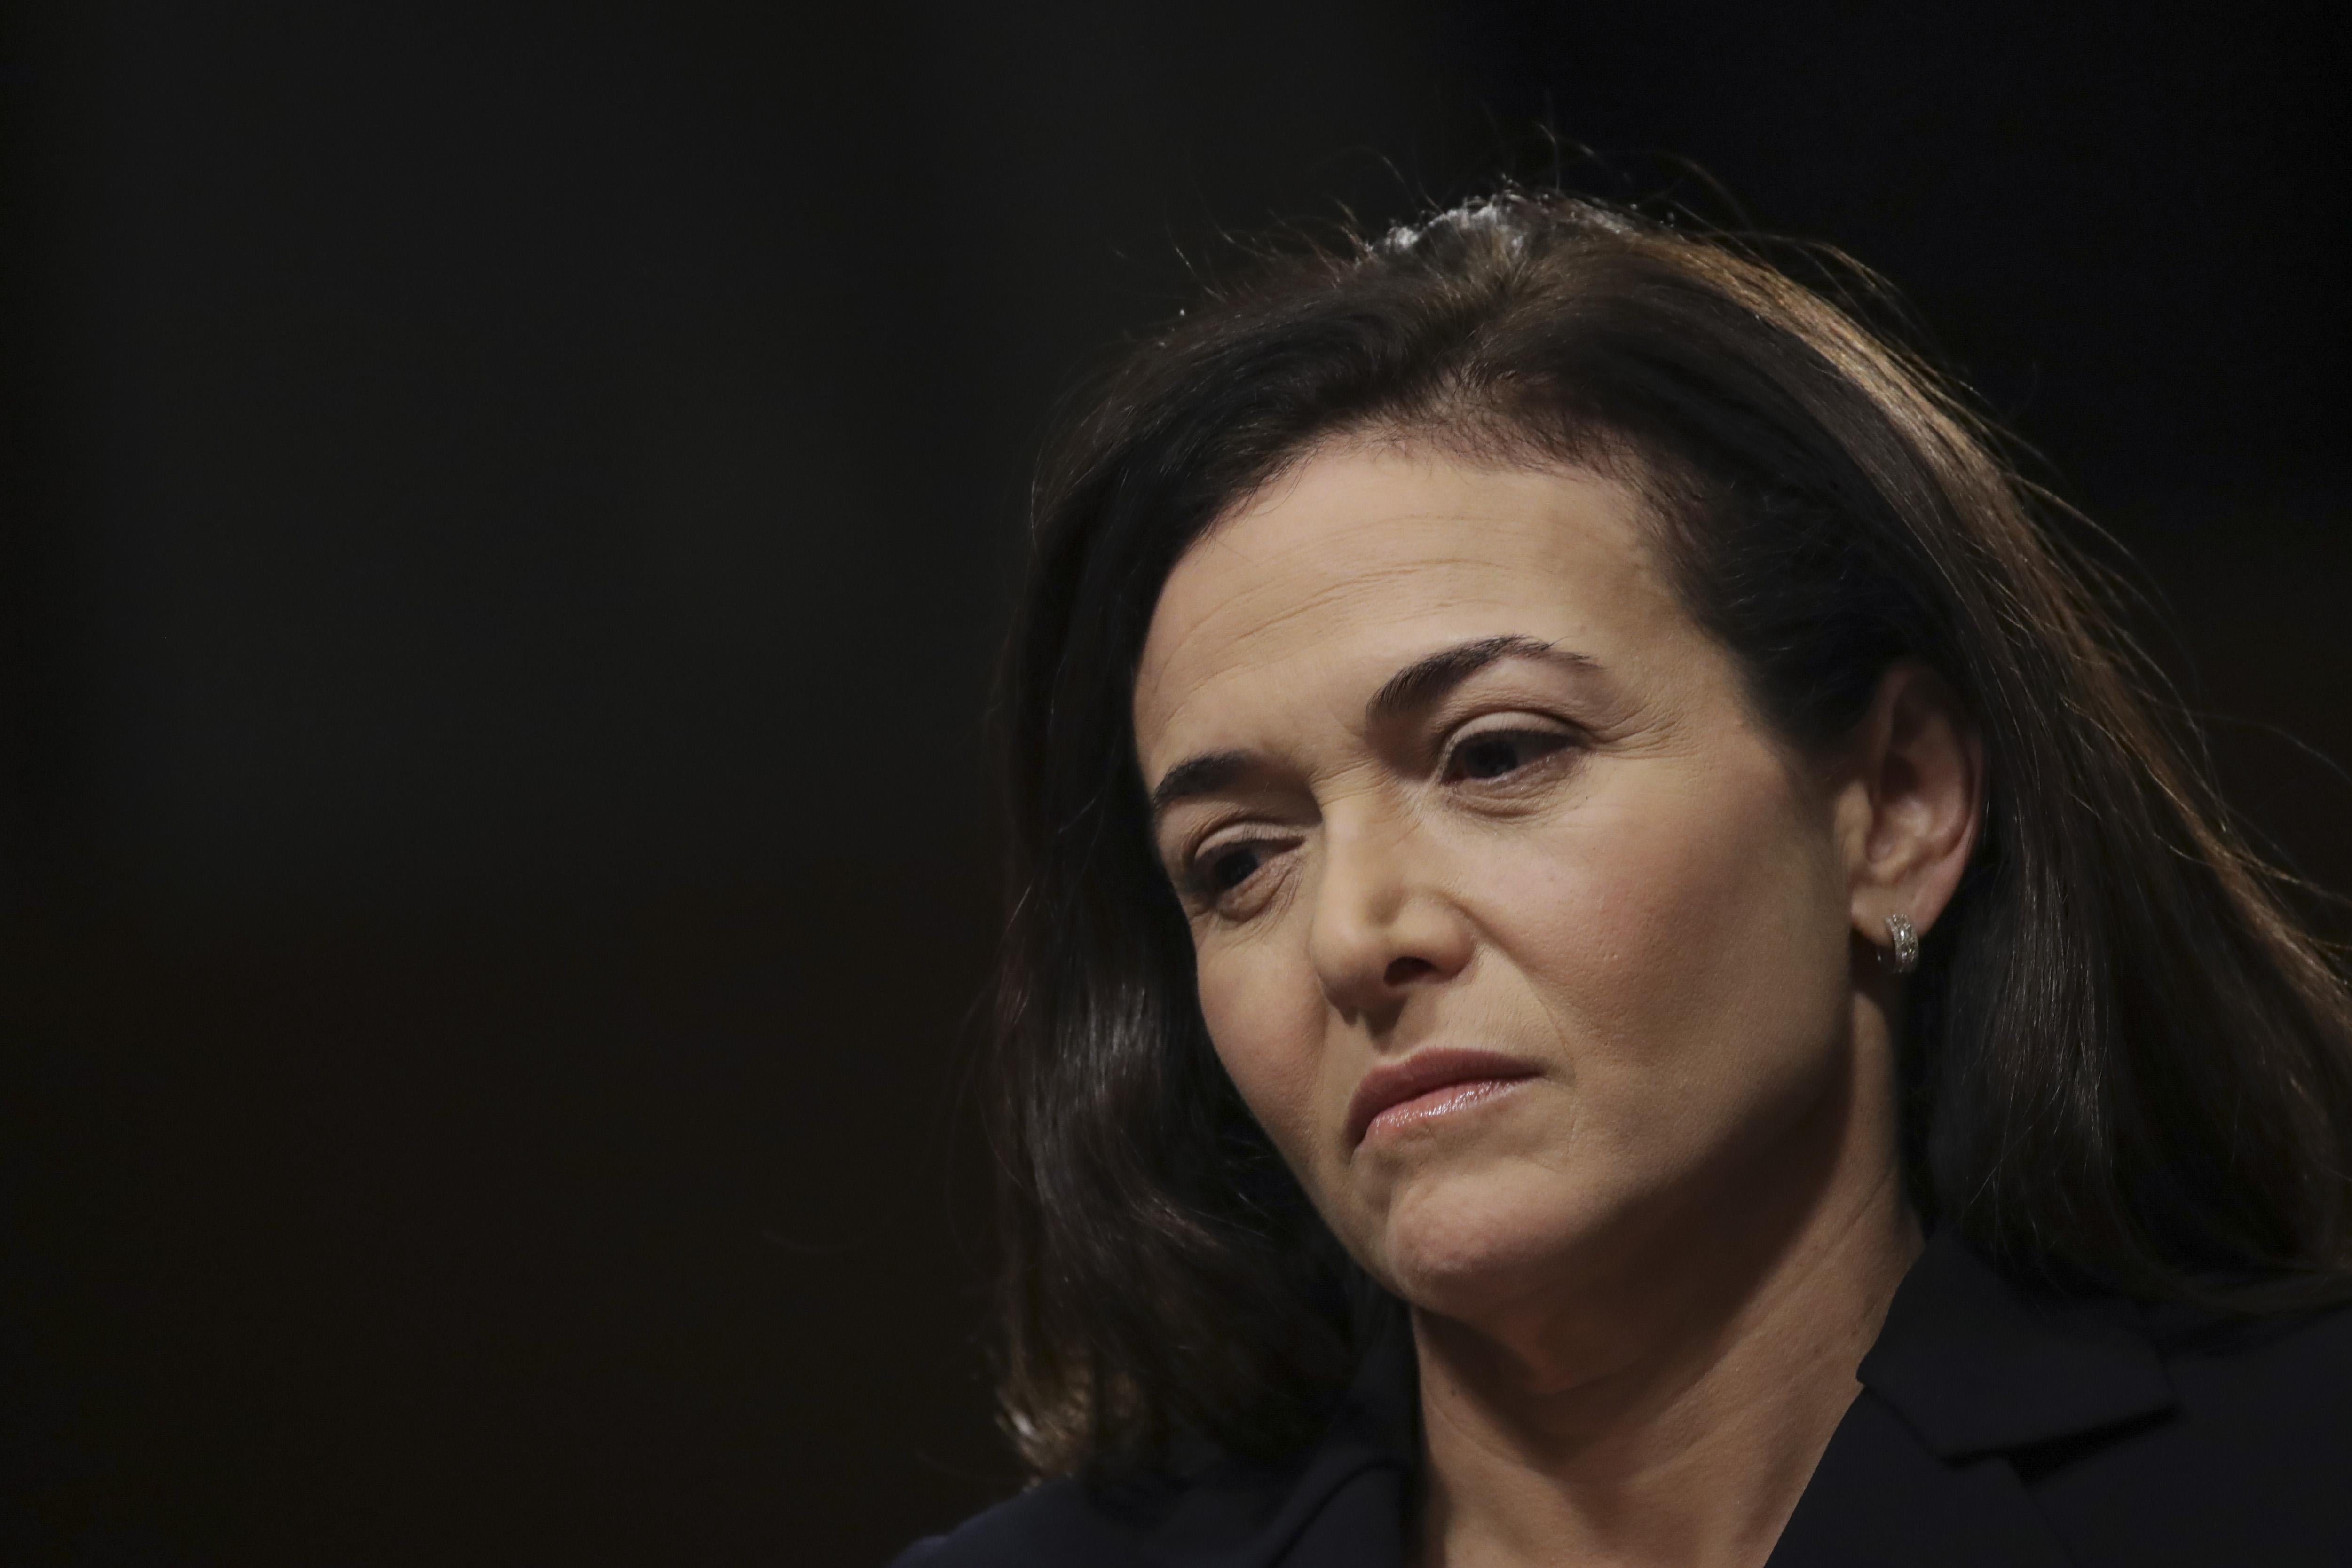 COO Sheryl Sandberg disclosed that she had come across Definers's work.